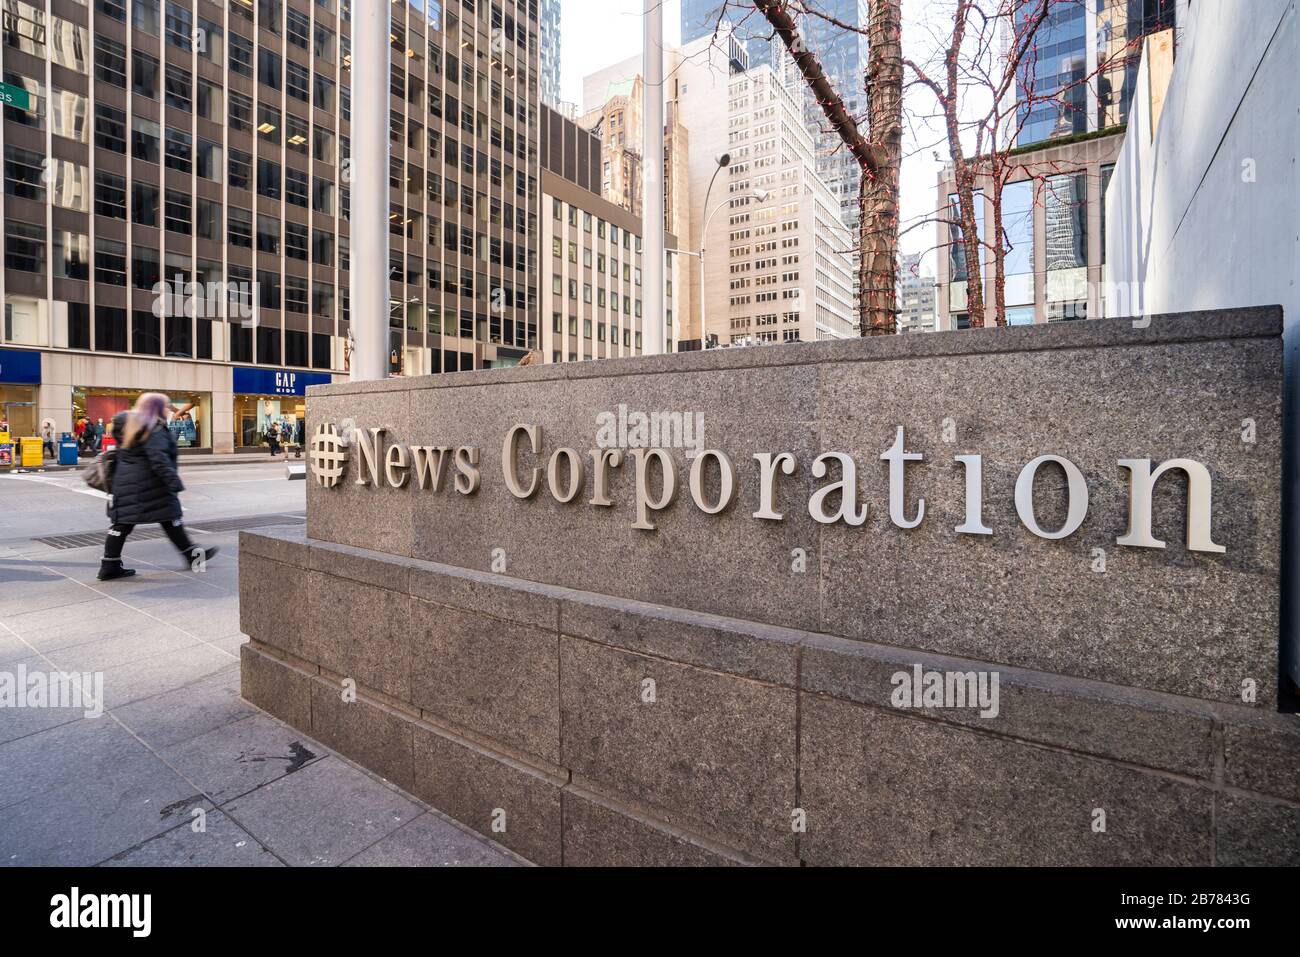 American mass media and publishing company News Corporation logo seen outside their headquarters building. Stock Photo